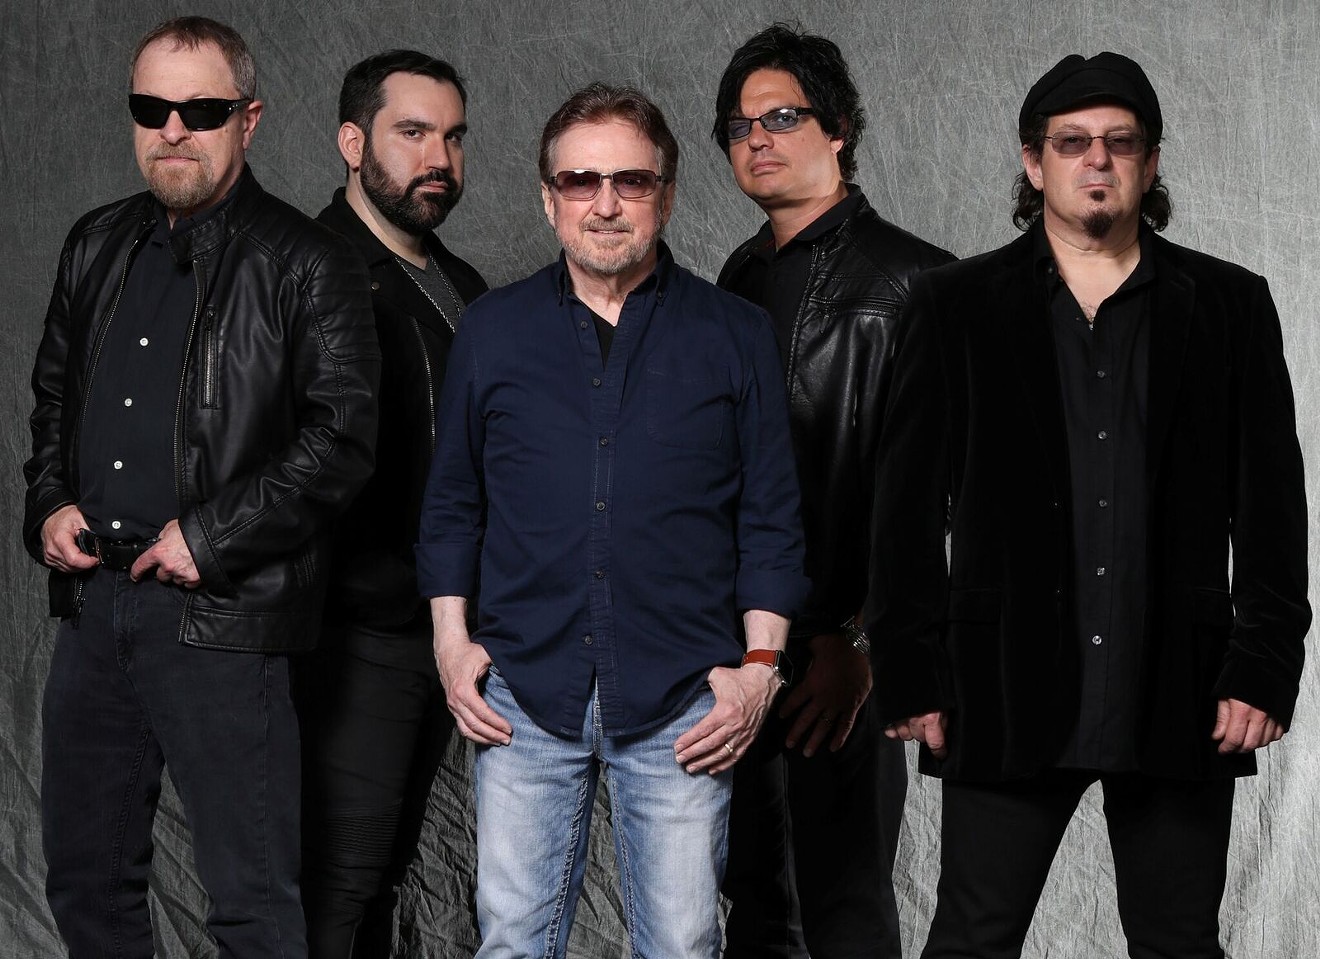 Let us tell you six reasons you should give your life savings away and get recruited by Blue Öyster Cult.